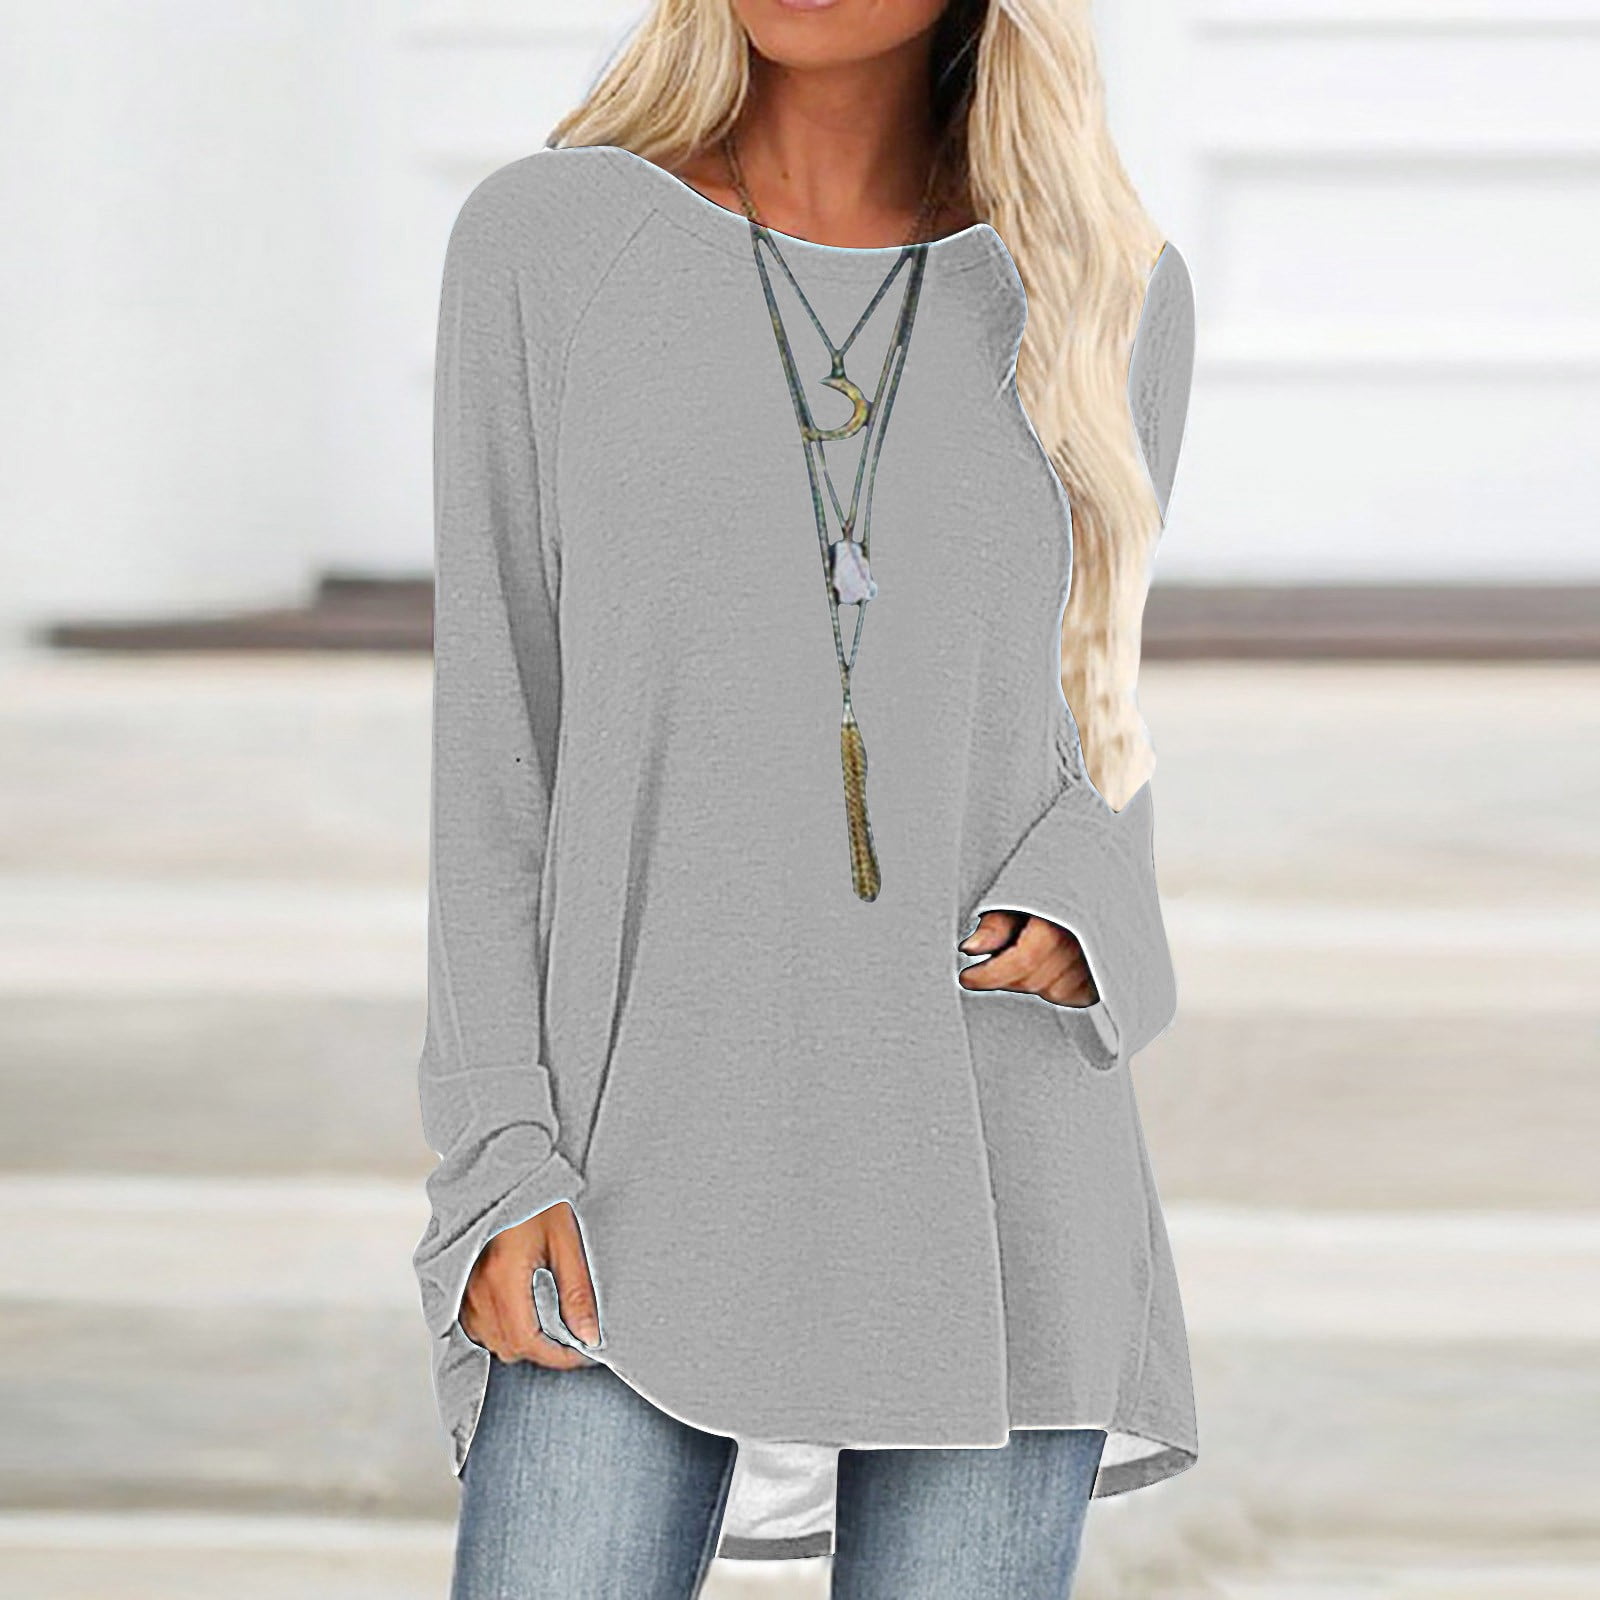 Tunic Tops for Leggings for Women Long Sleeve Round Neck Tricolor Stitching  T Shirts Casual Loose Fit Blouses,Grey S-2XL